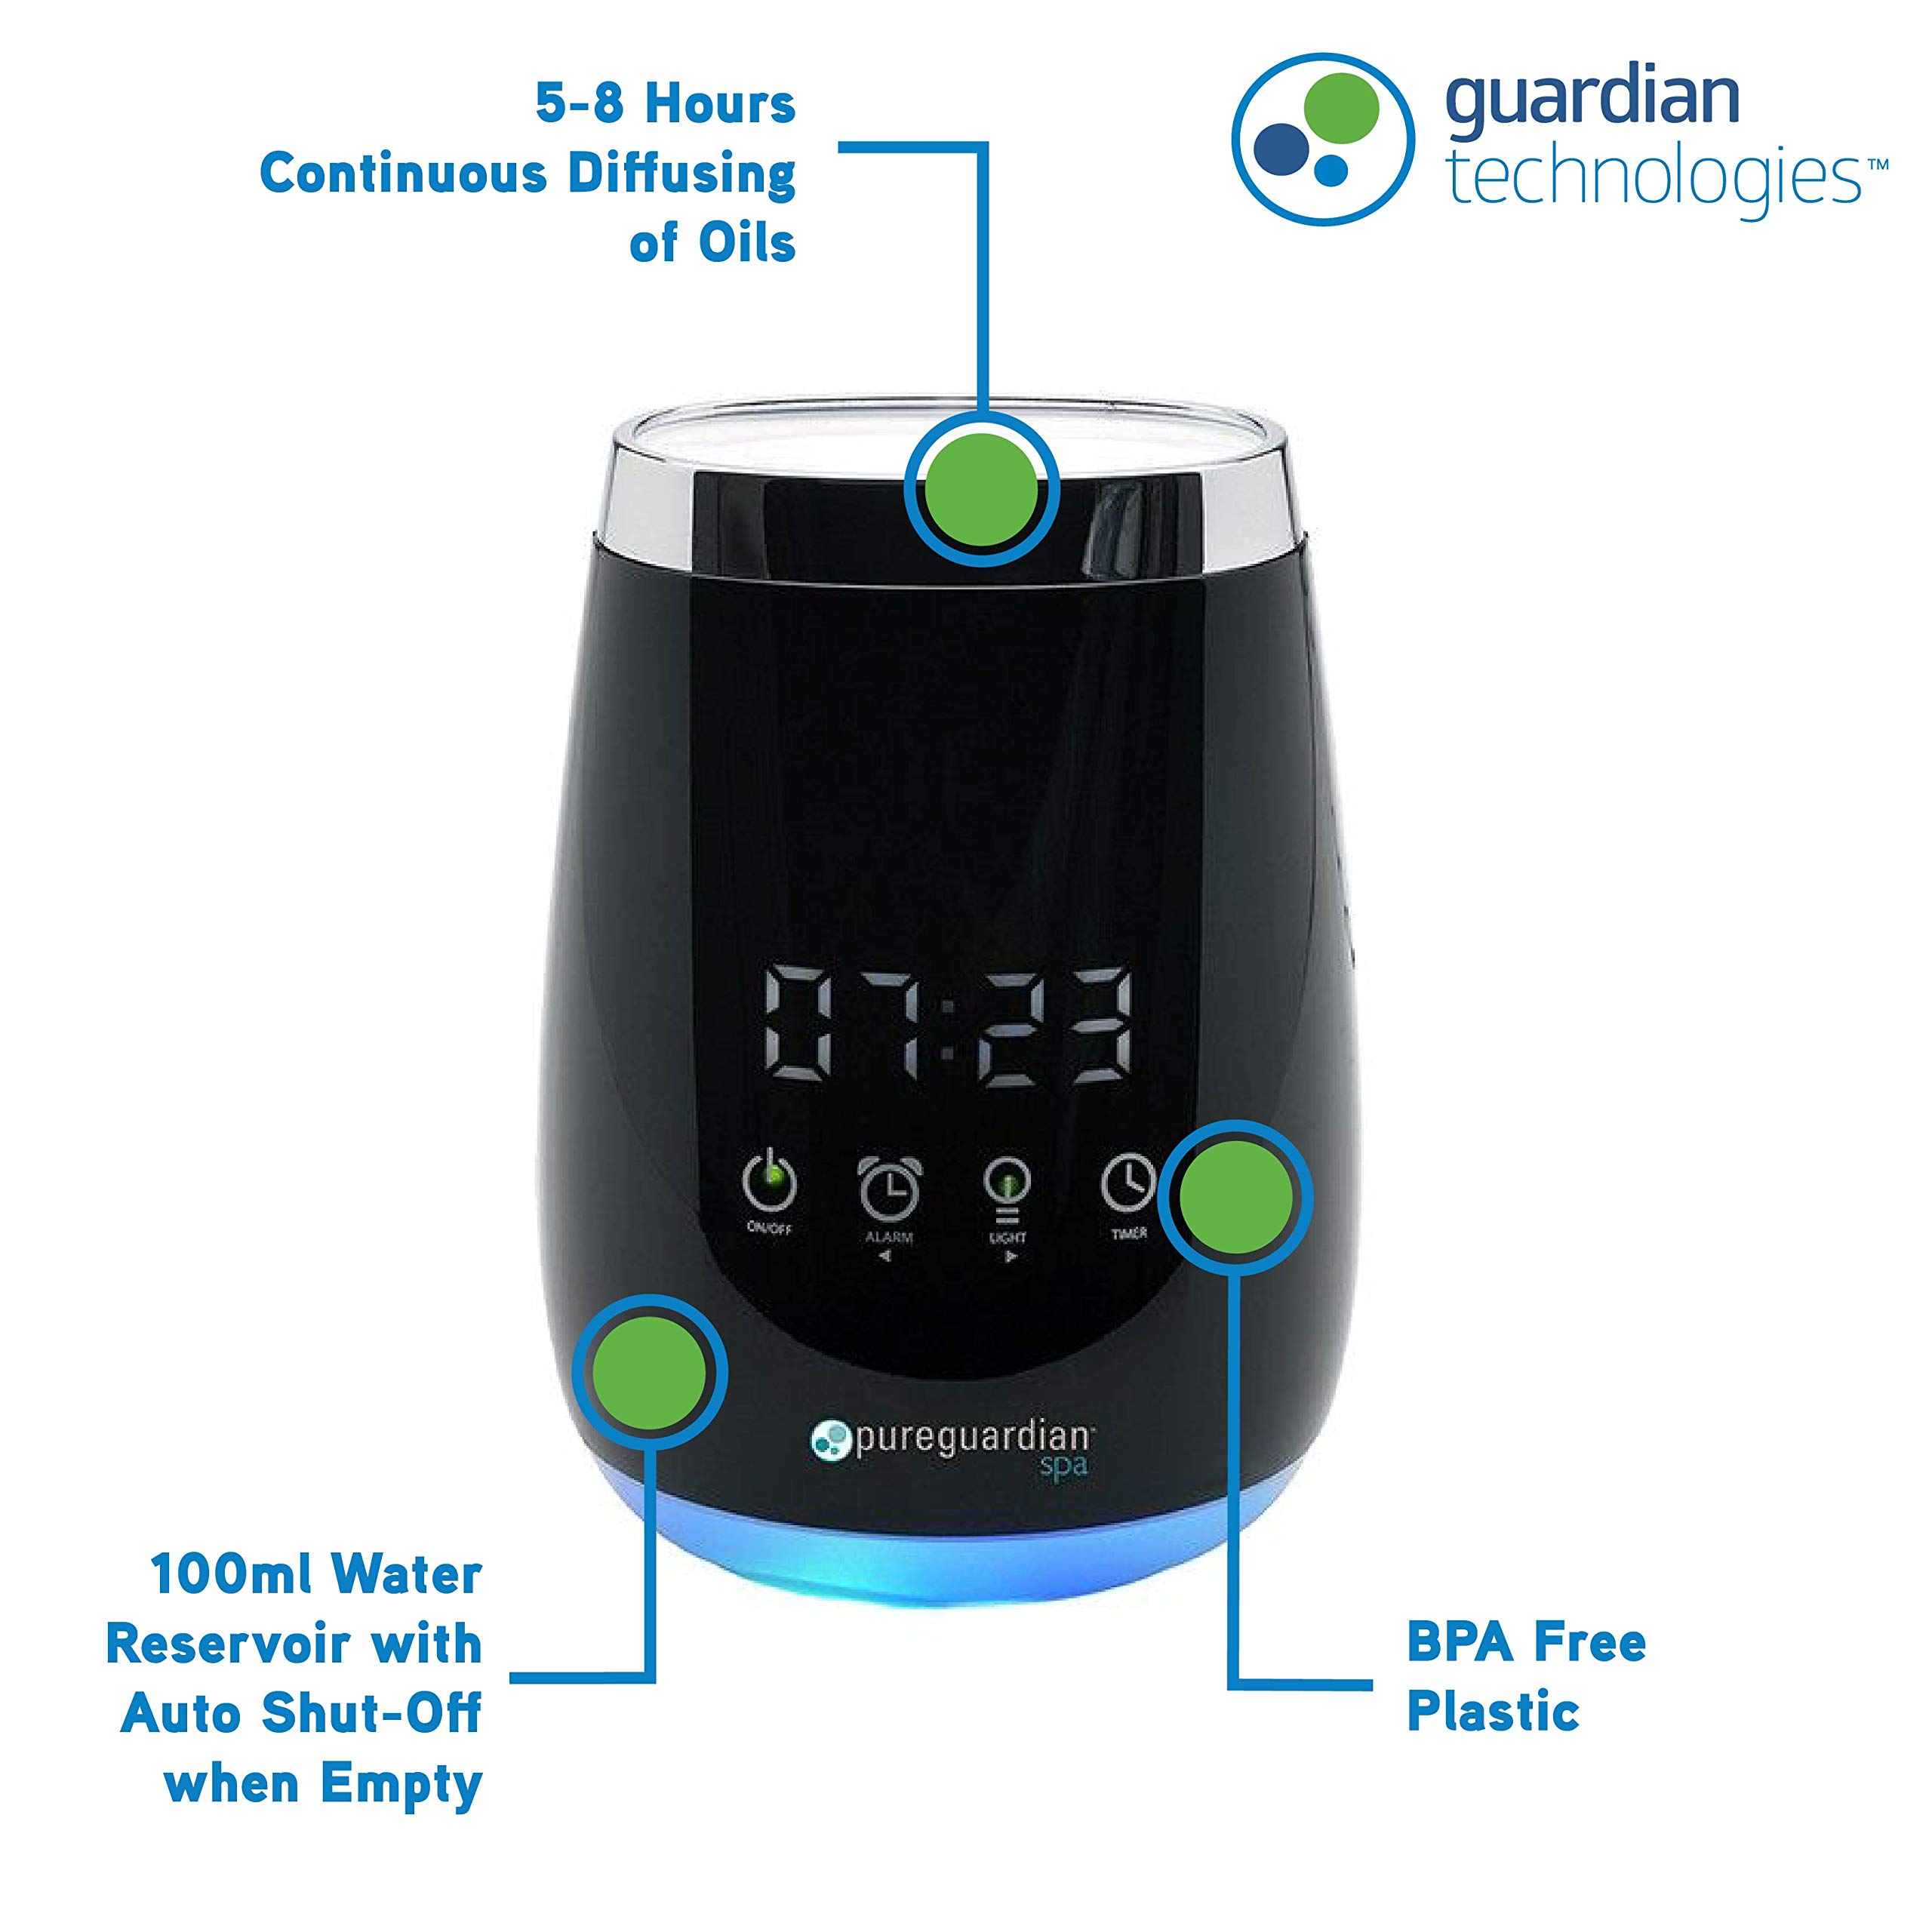 PureGuardian Guardian Technologies Diffuser for Essential Oils, Ultrasonic, Cool Mist, Aromatherapy Creates Relaxing Environment, Optional Night light, Alarm Clock, Timer, Up to 5-8 hours, SPA260